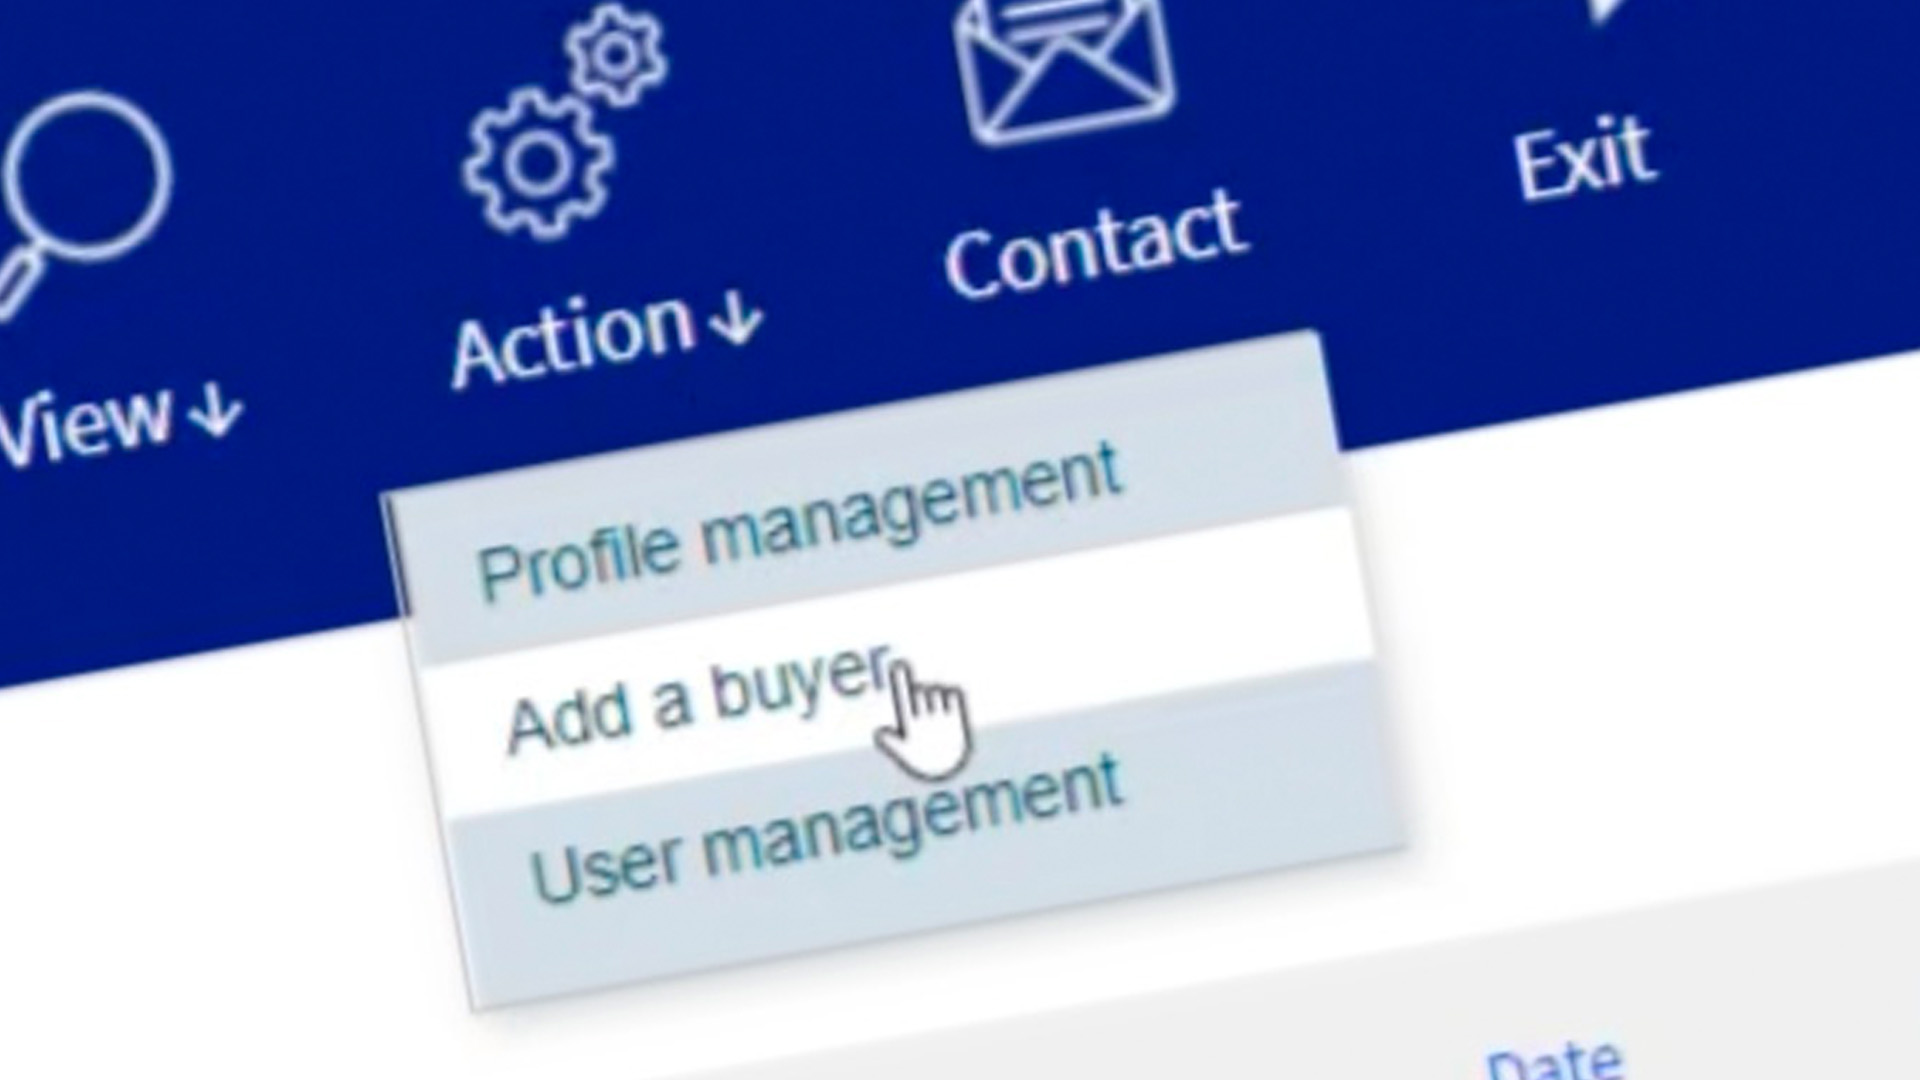 TradEnable Portal: How to add a buyer and request a limit